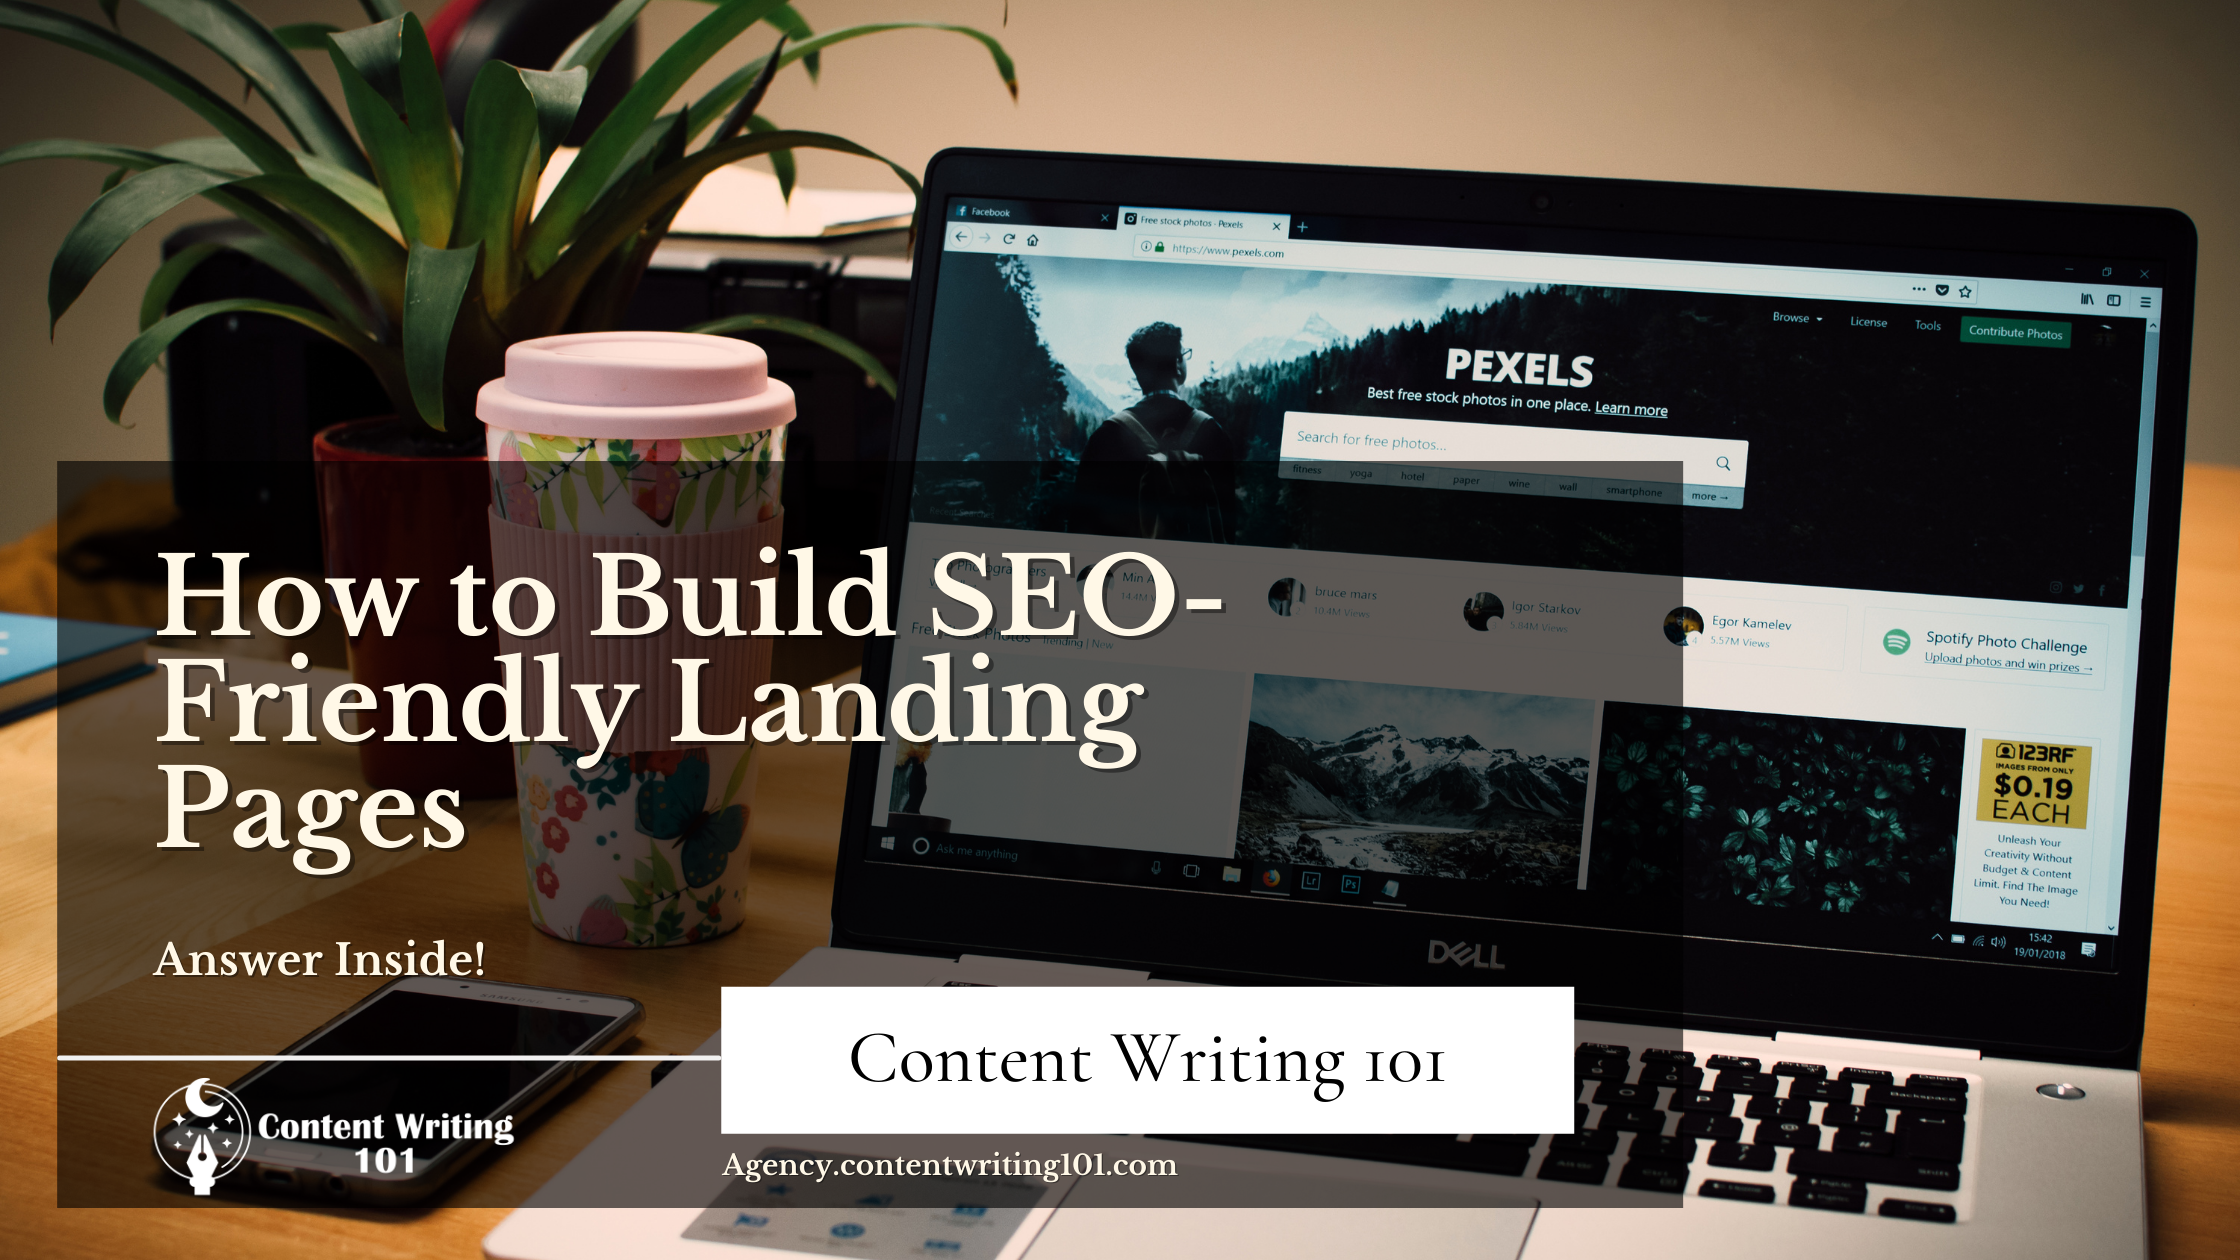 How to Build SEO-Friendly Landing Pages